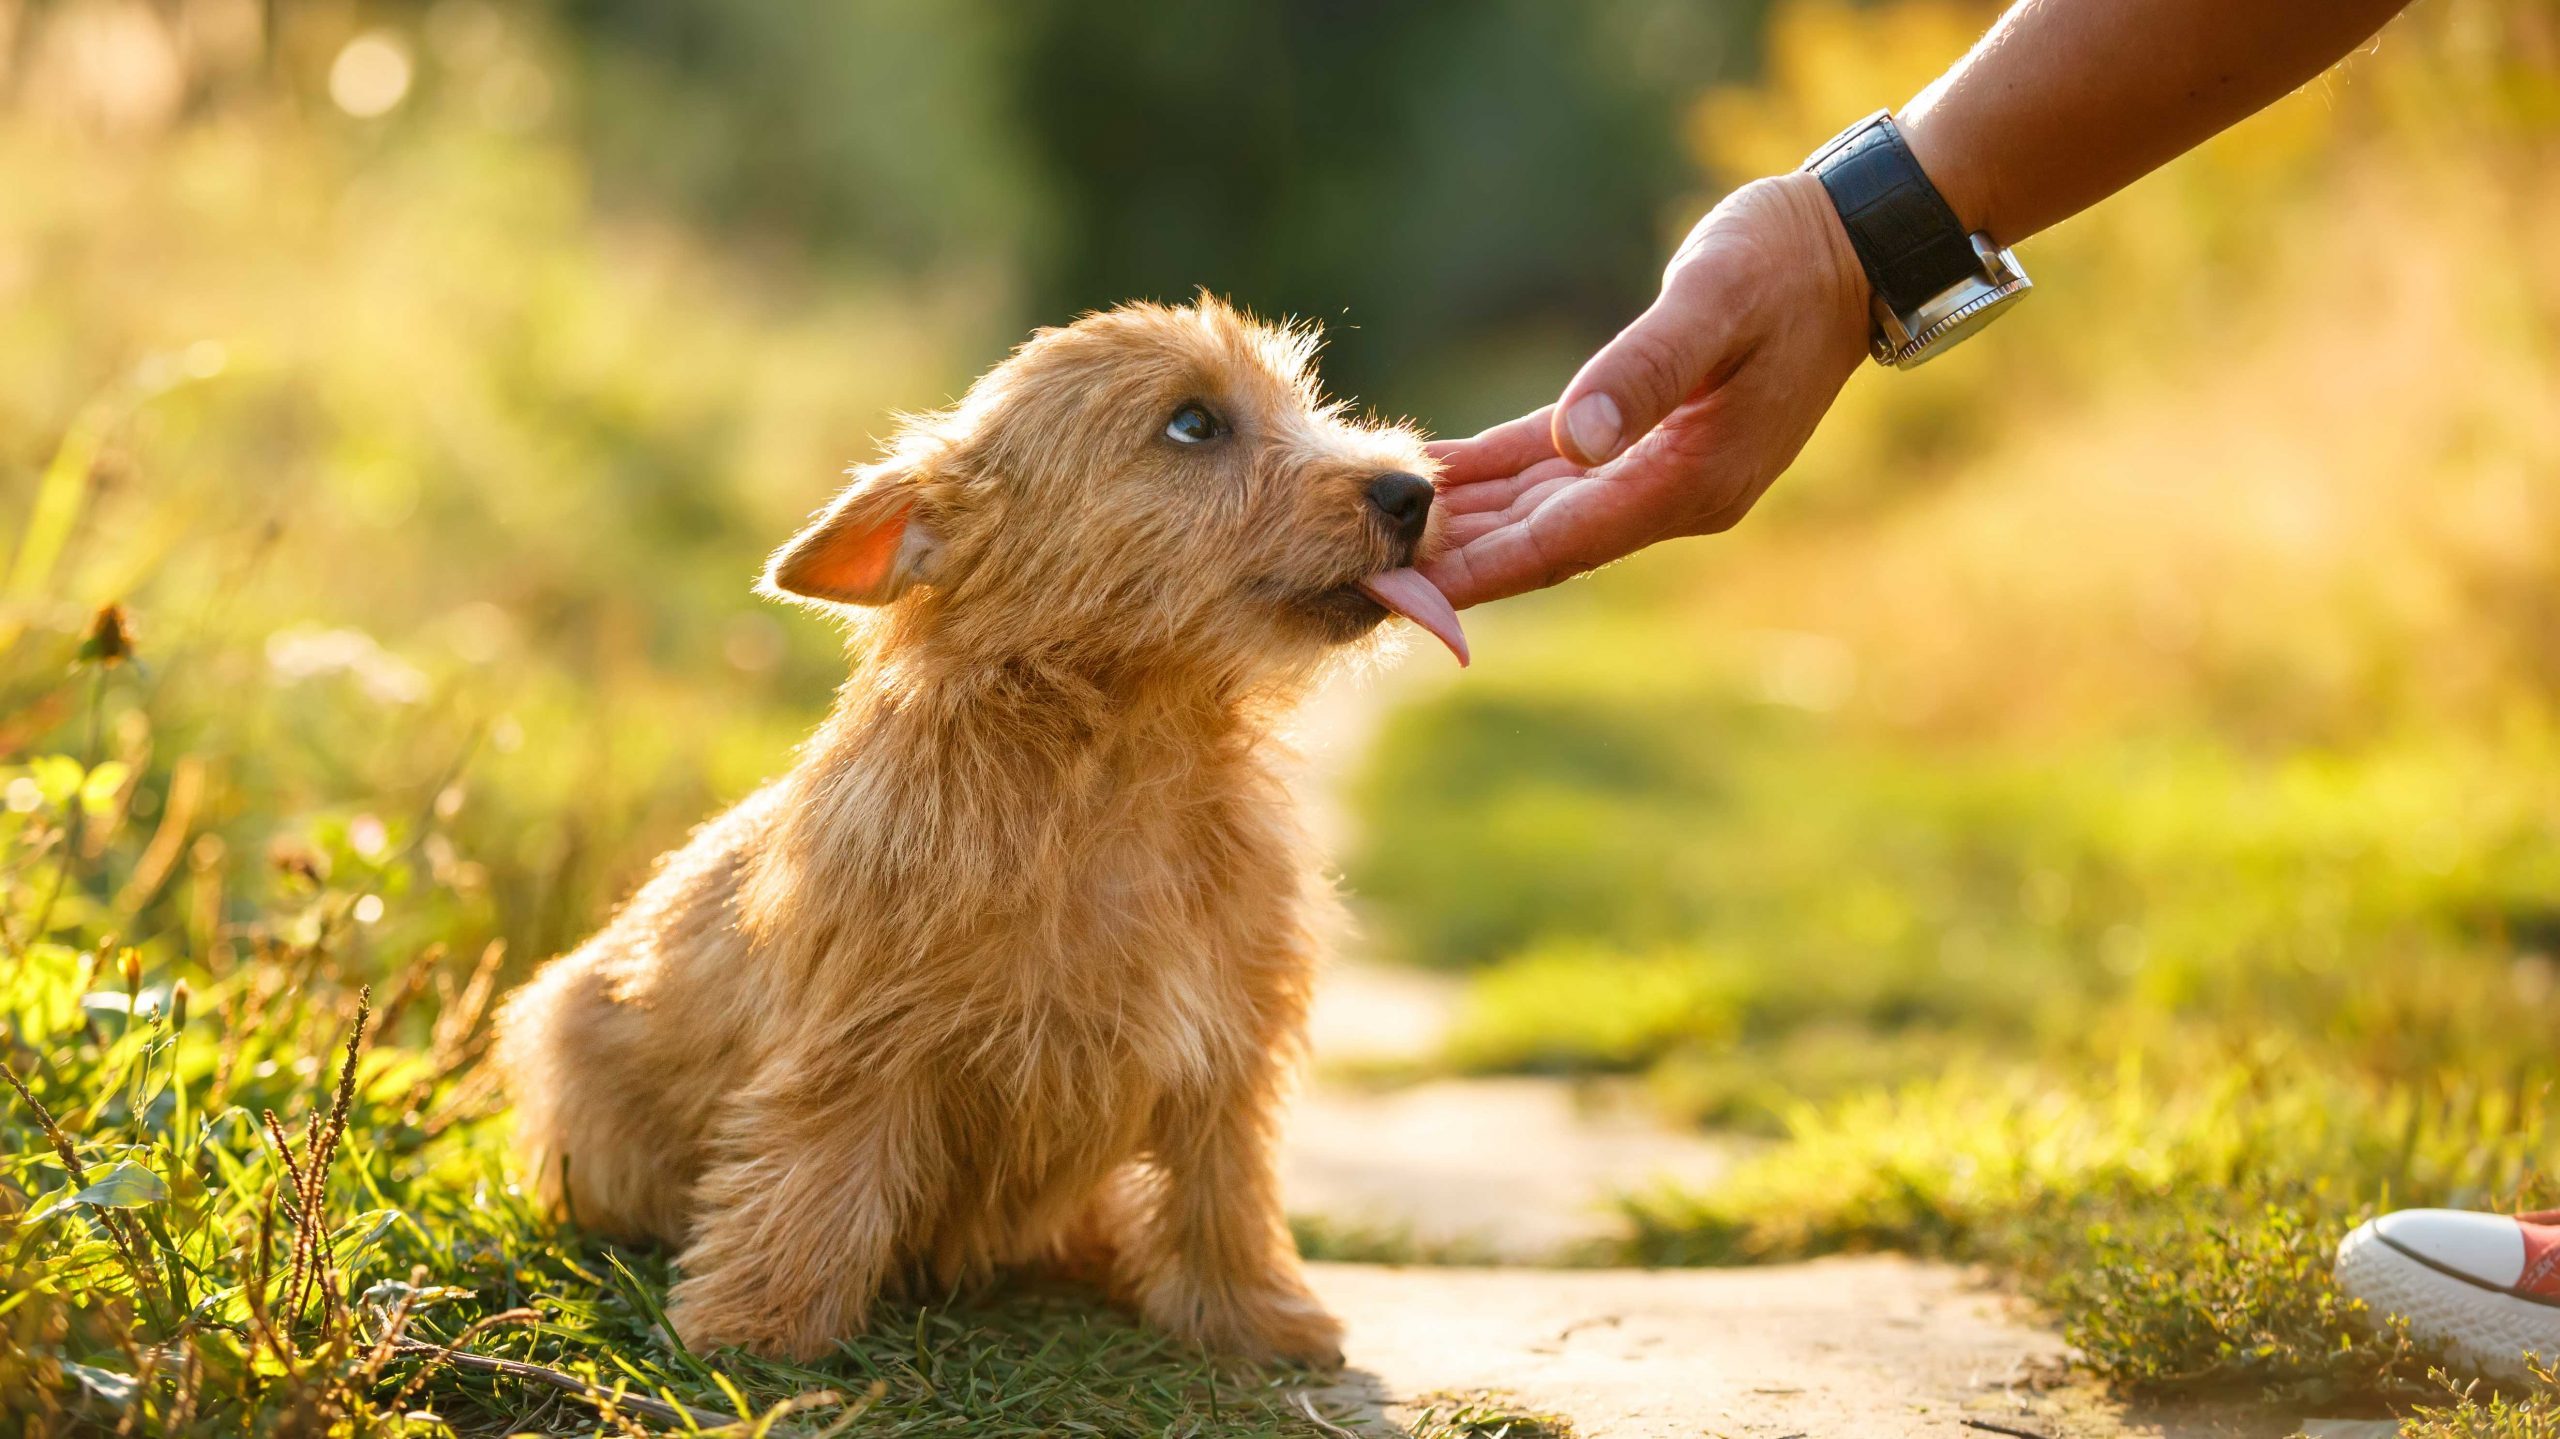 What Does It Mean When a Dog Licks You? | Reader's Digest